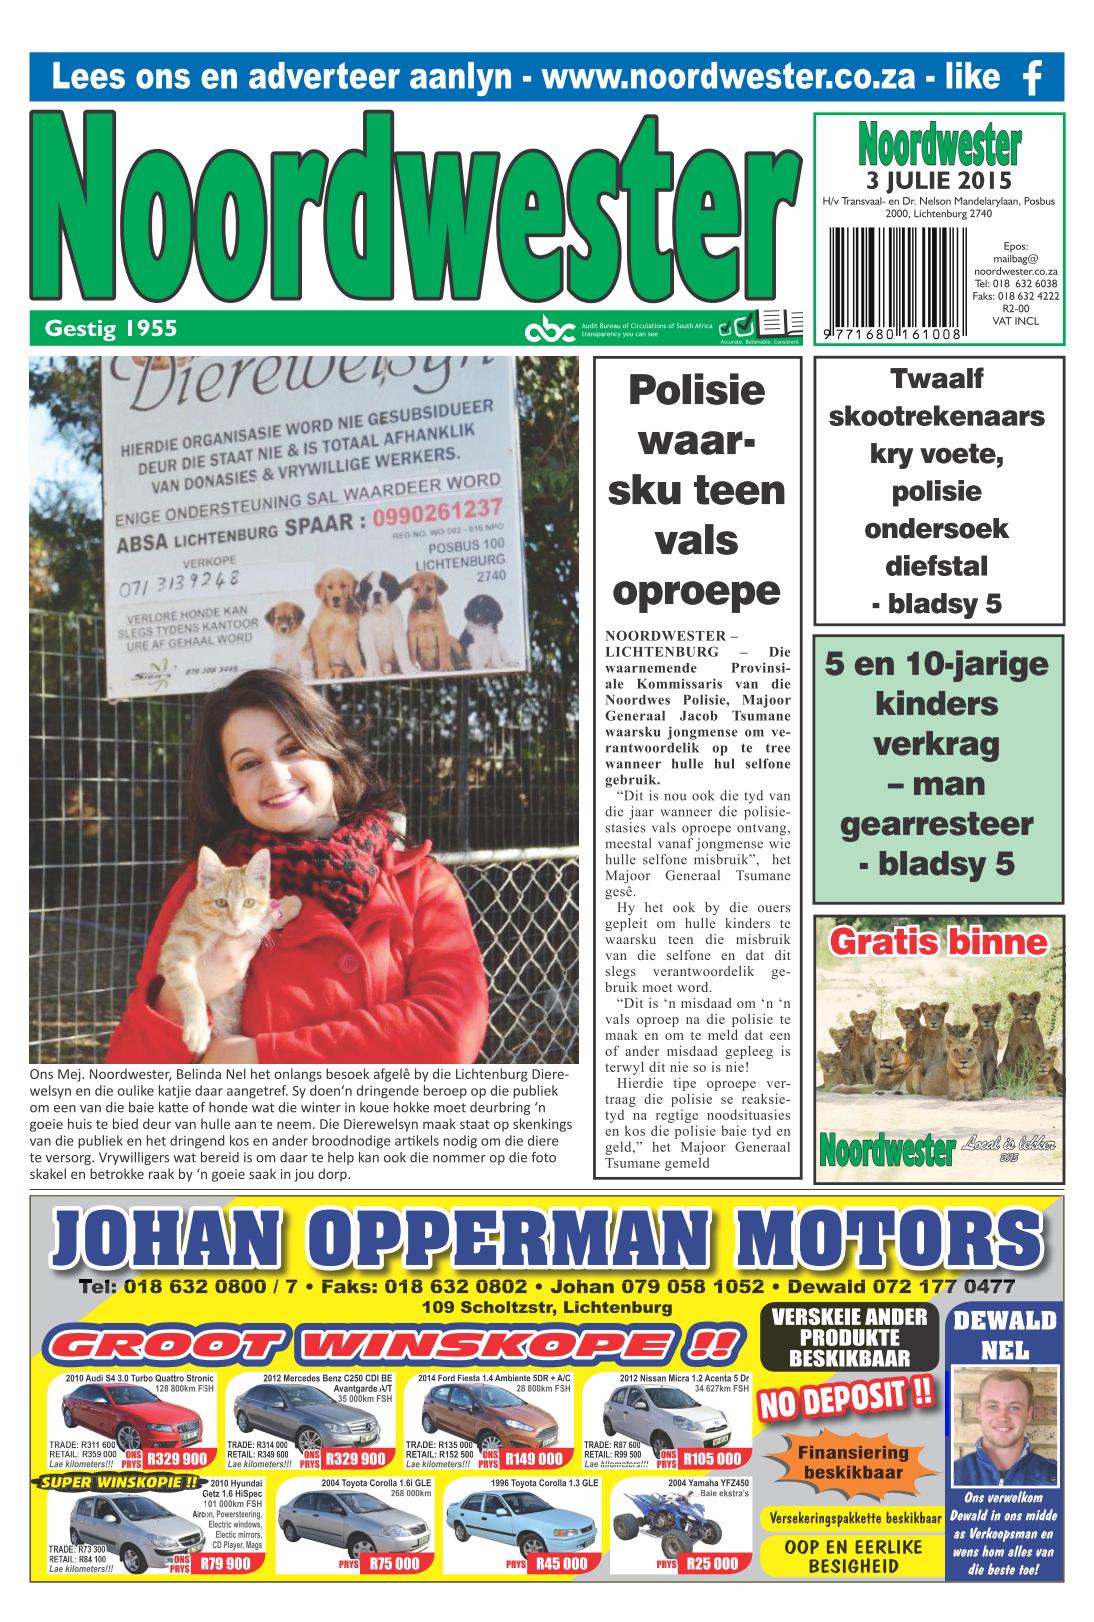 Frontpage